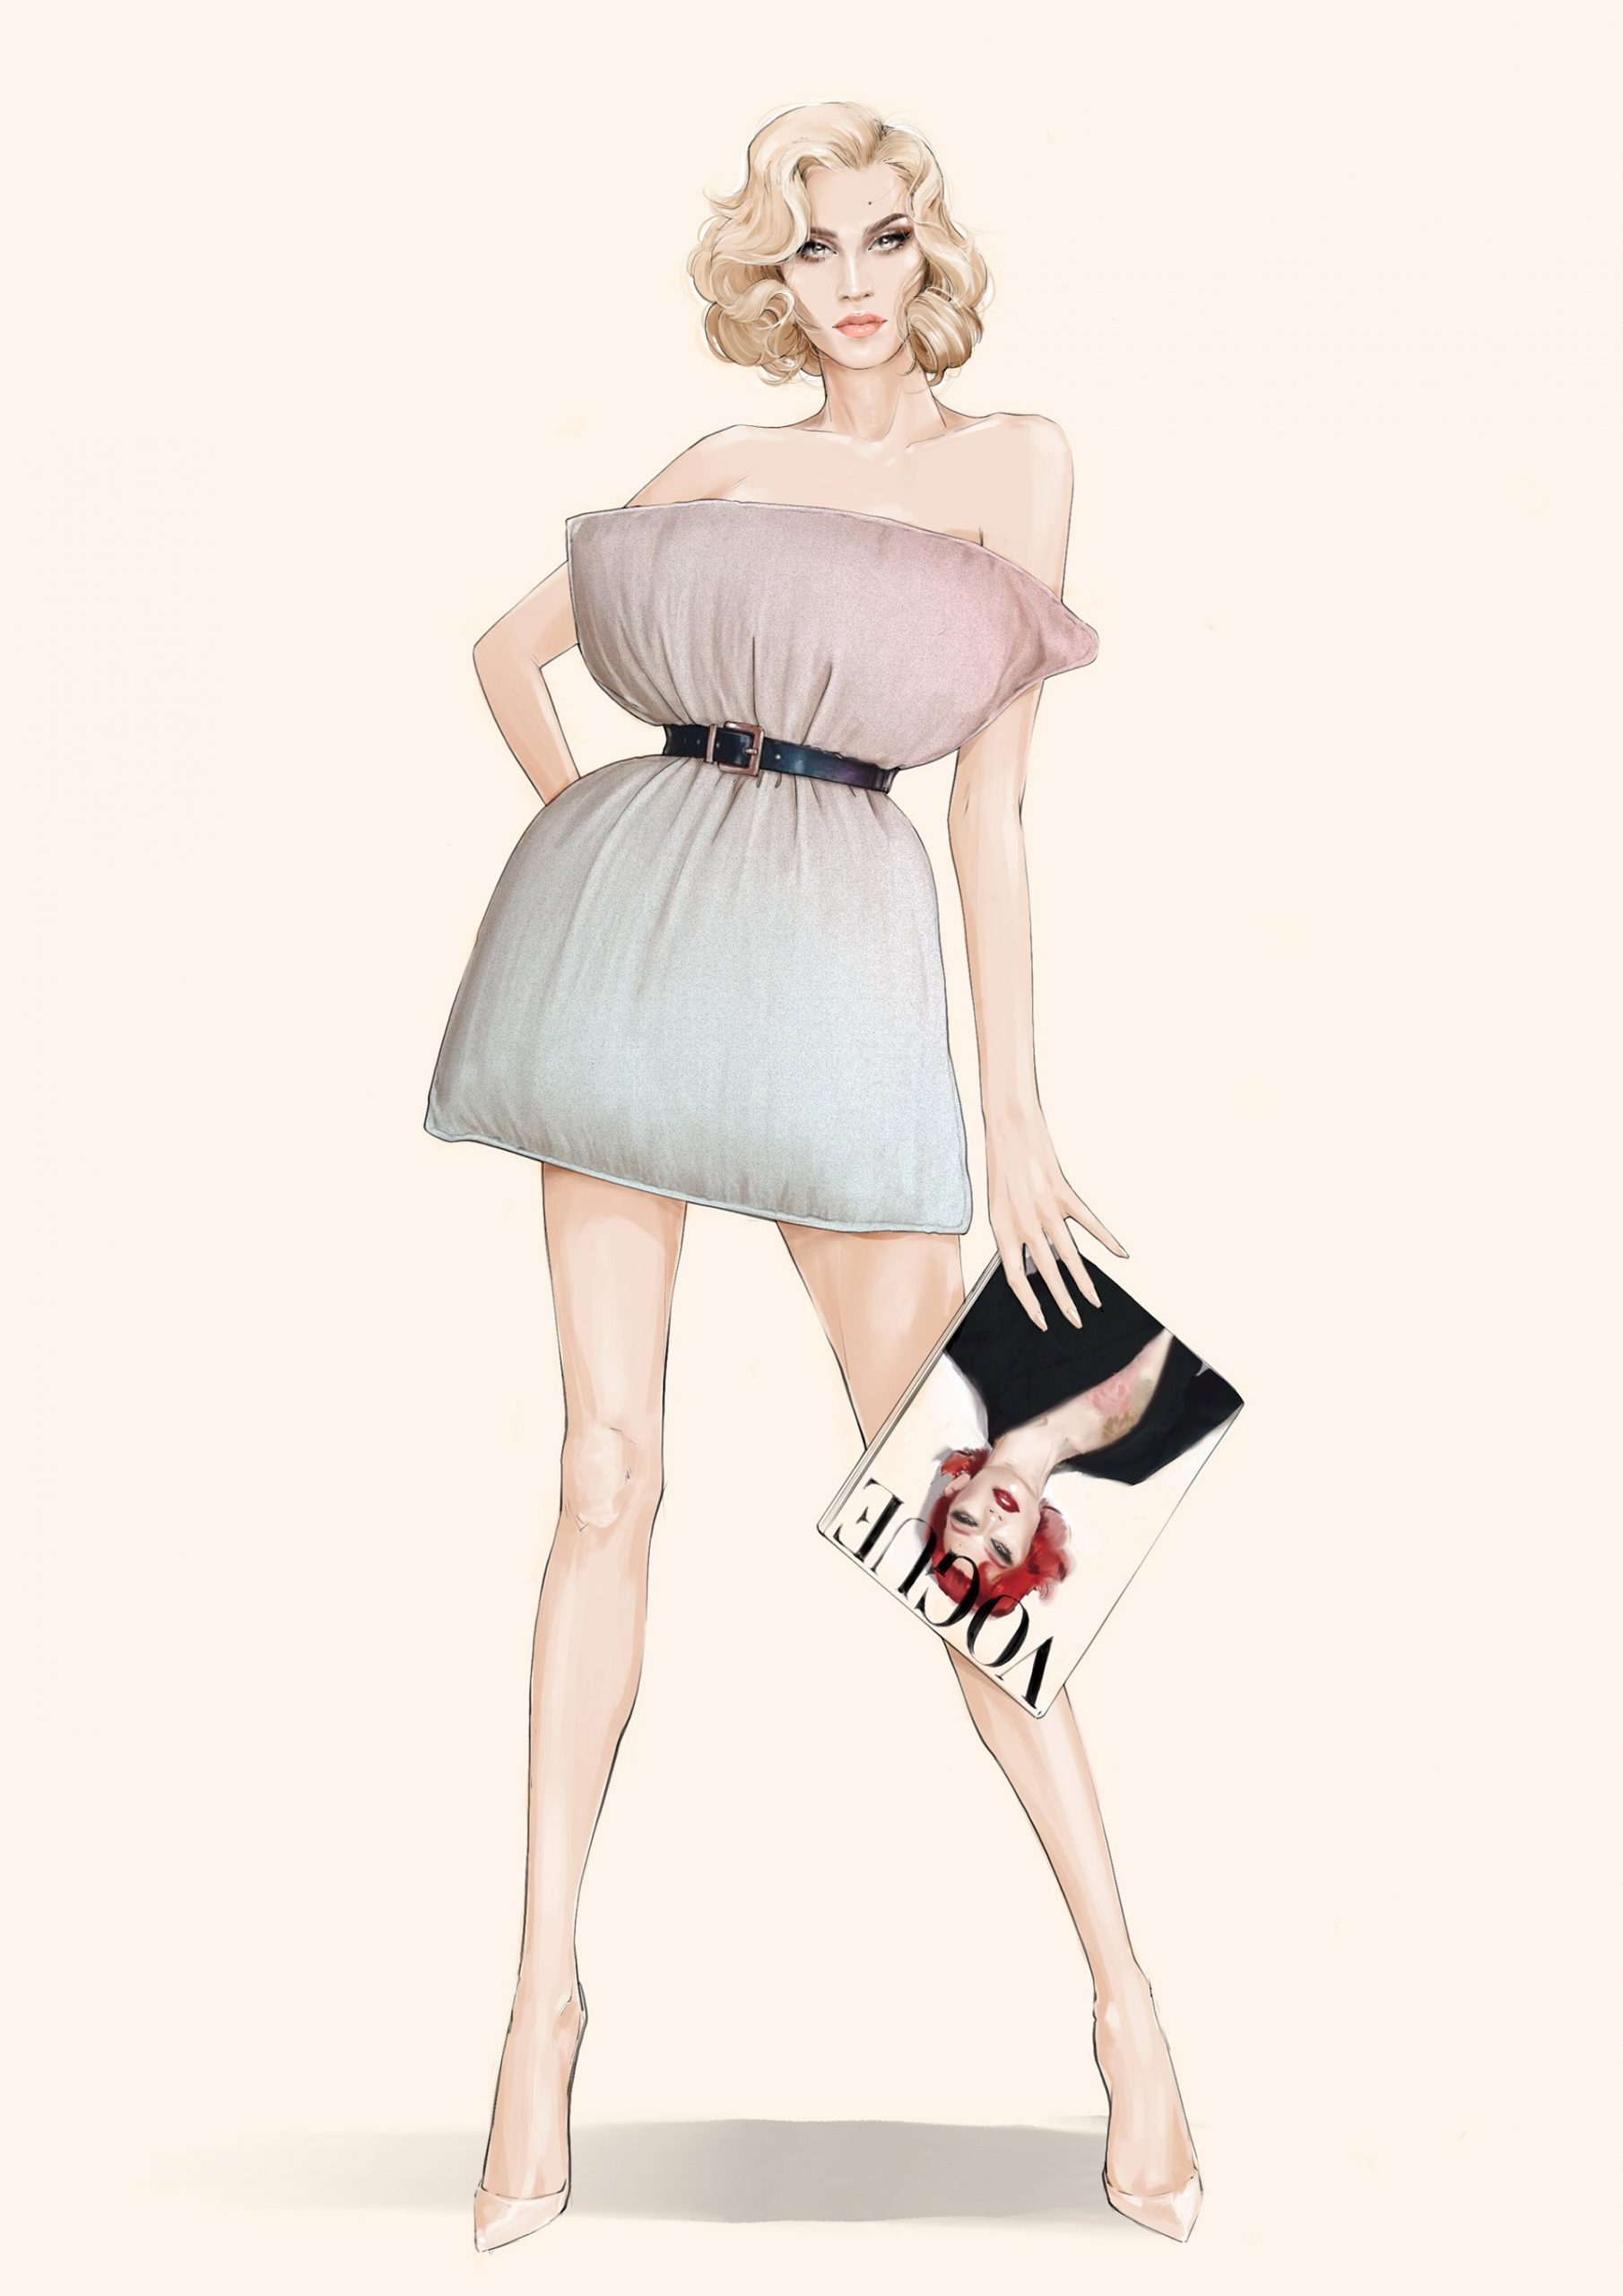 Beautiful Fashion Illustrations by Alex Tang | Daily design inspiration